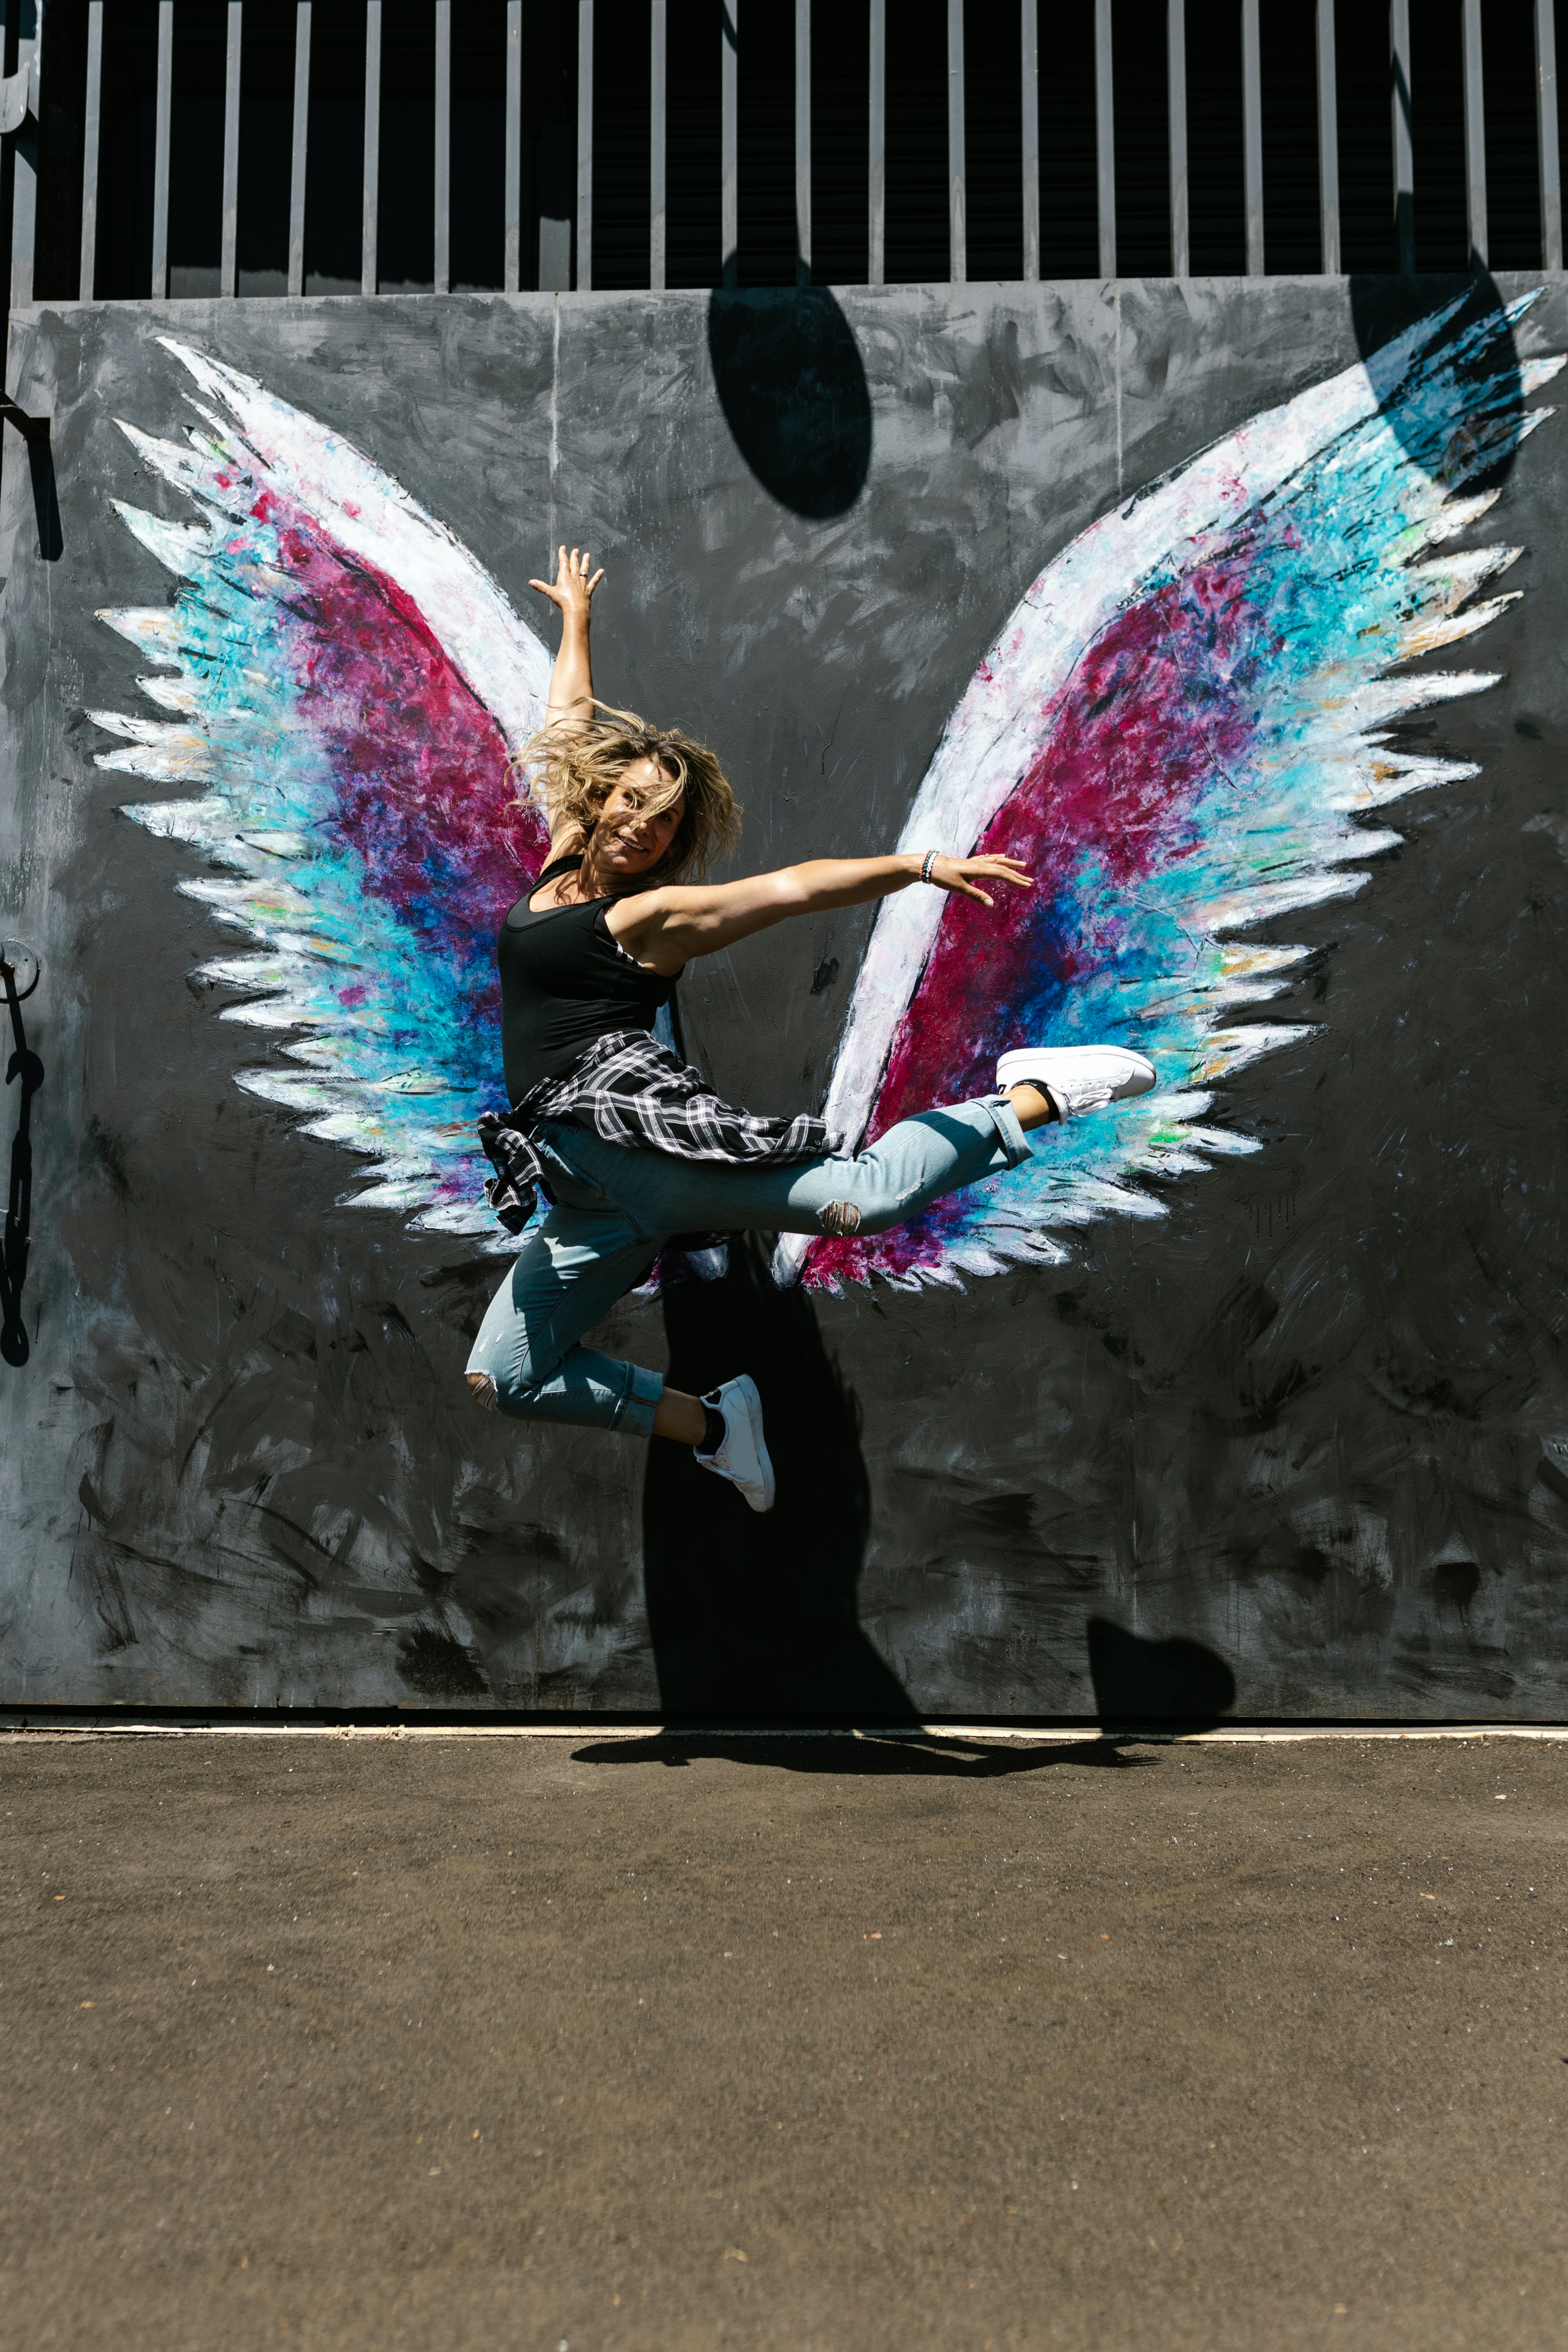 A woman jumping in front of a wall with painted wings. | Source: Pexels